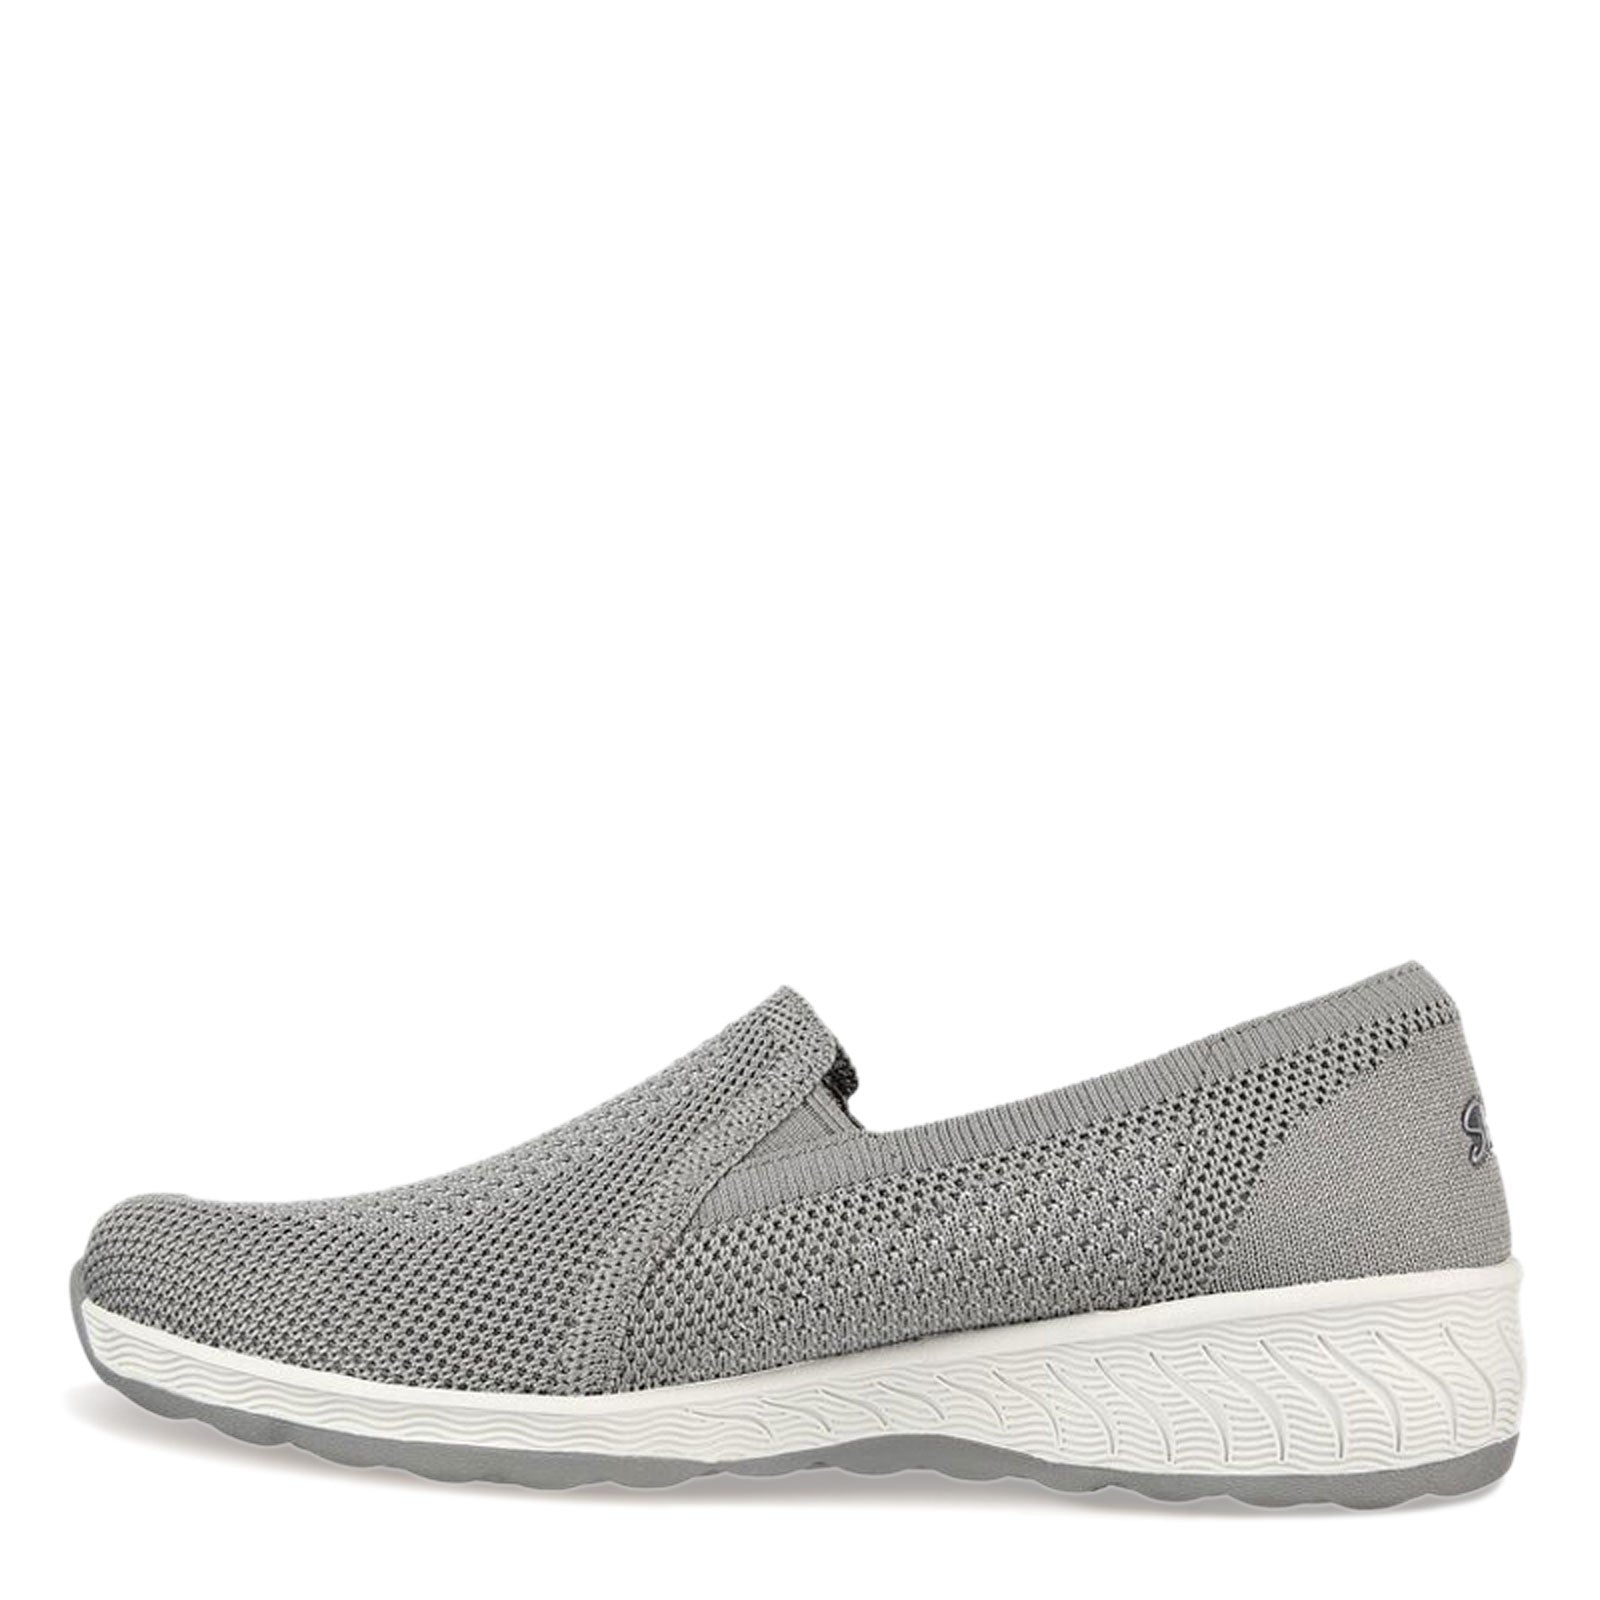 Women's Skechers, Relaxed Fit: Up-Lifted - New Rules Slip-On